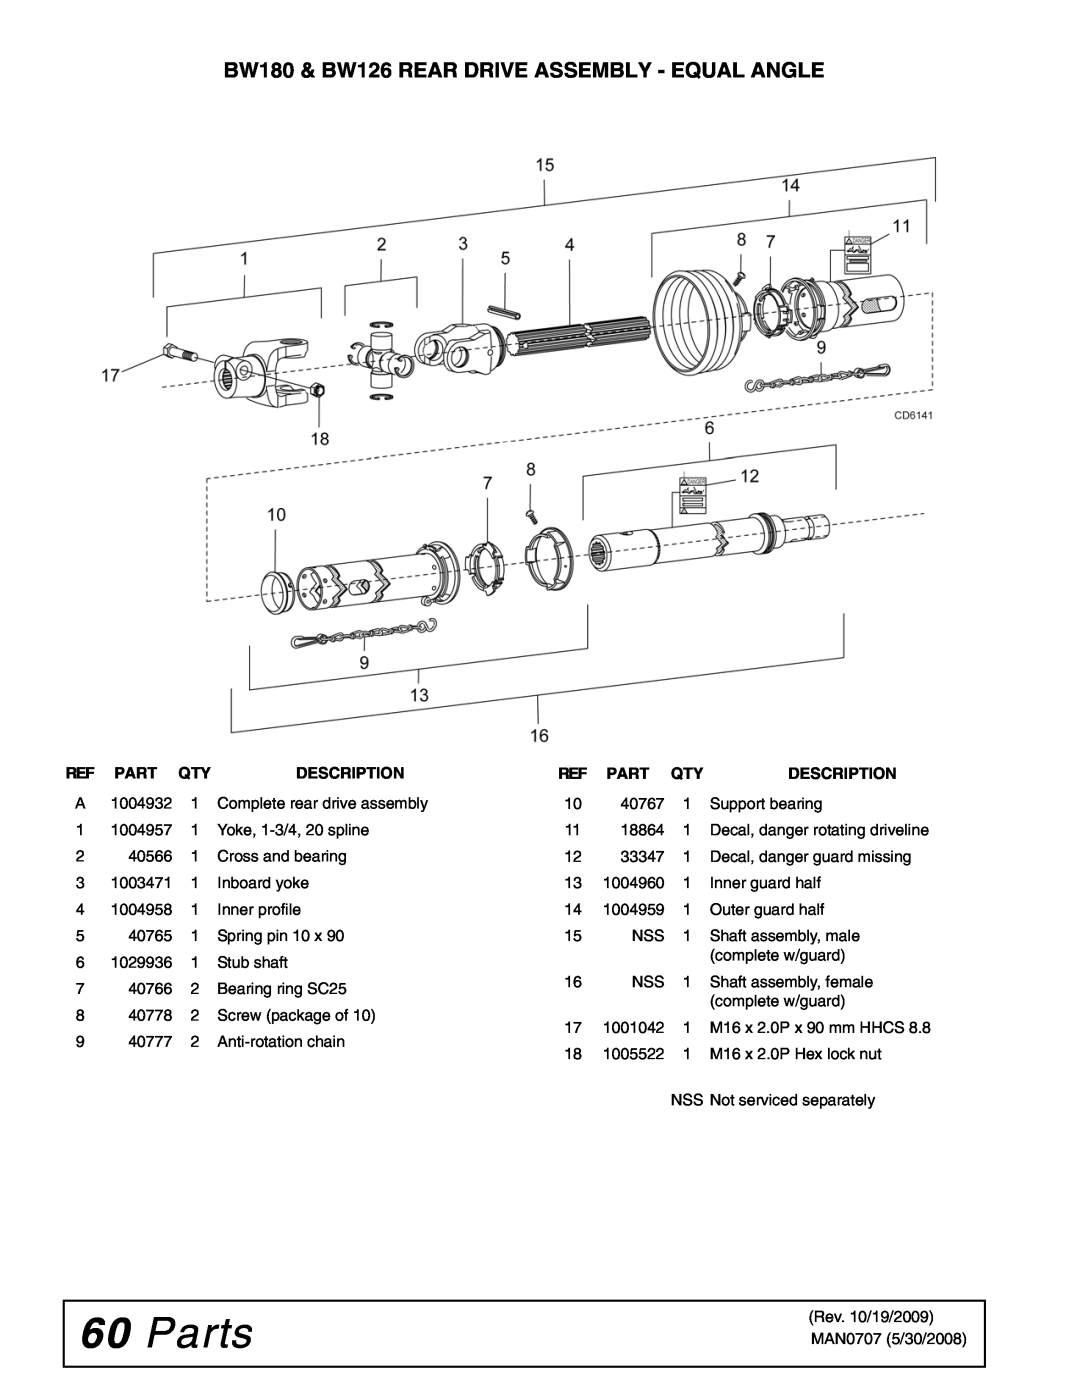 Woods Equipment BW180Q-3, BW126-3, BW126Q-3, BW180-3 Parts, BW180 & BW126 REAR DRIVE ASSEMBLY - EQUAL ANGLE, Description 